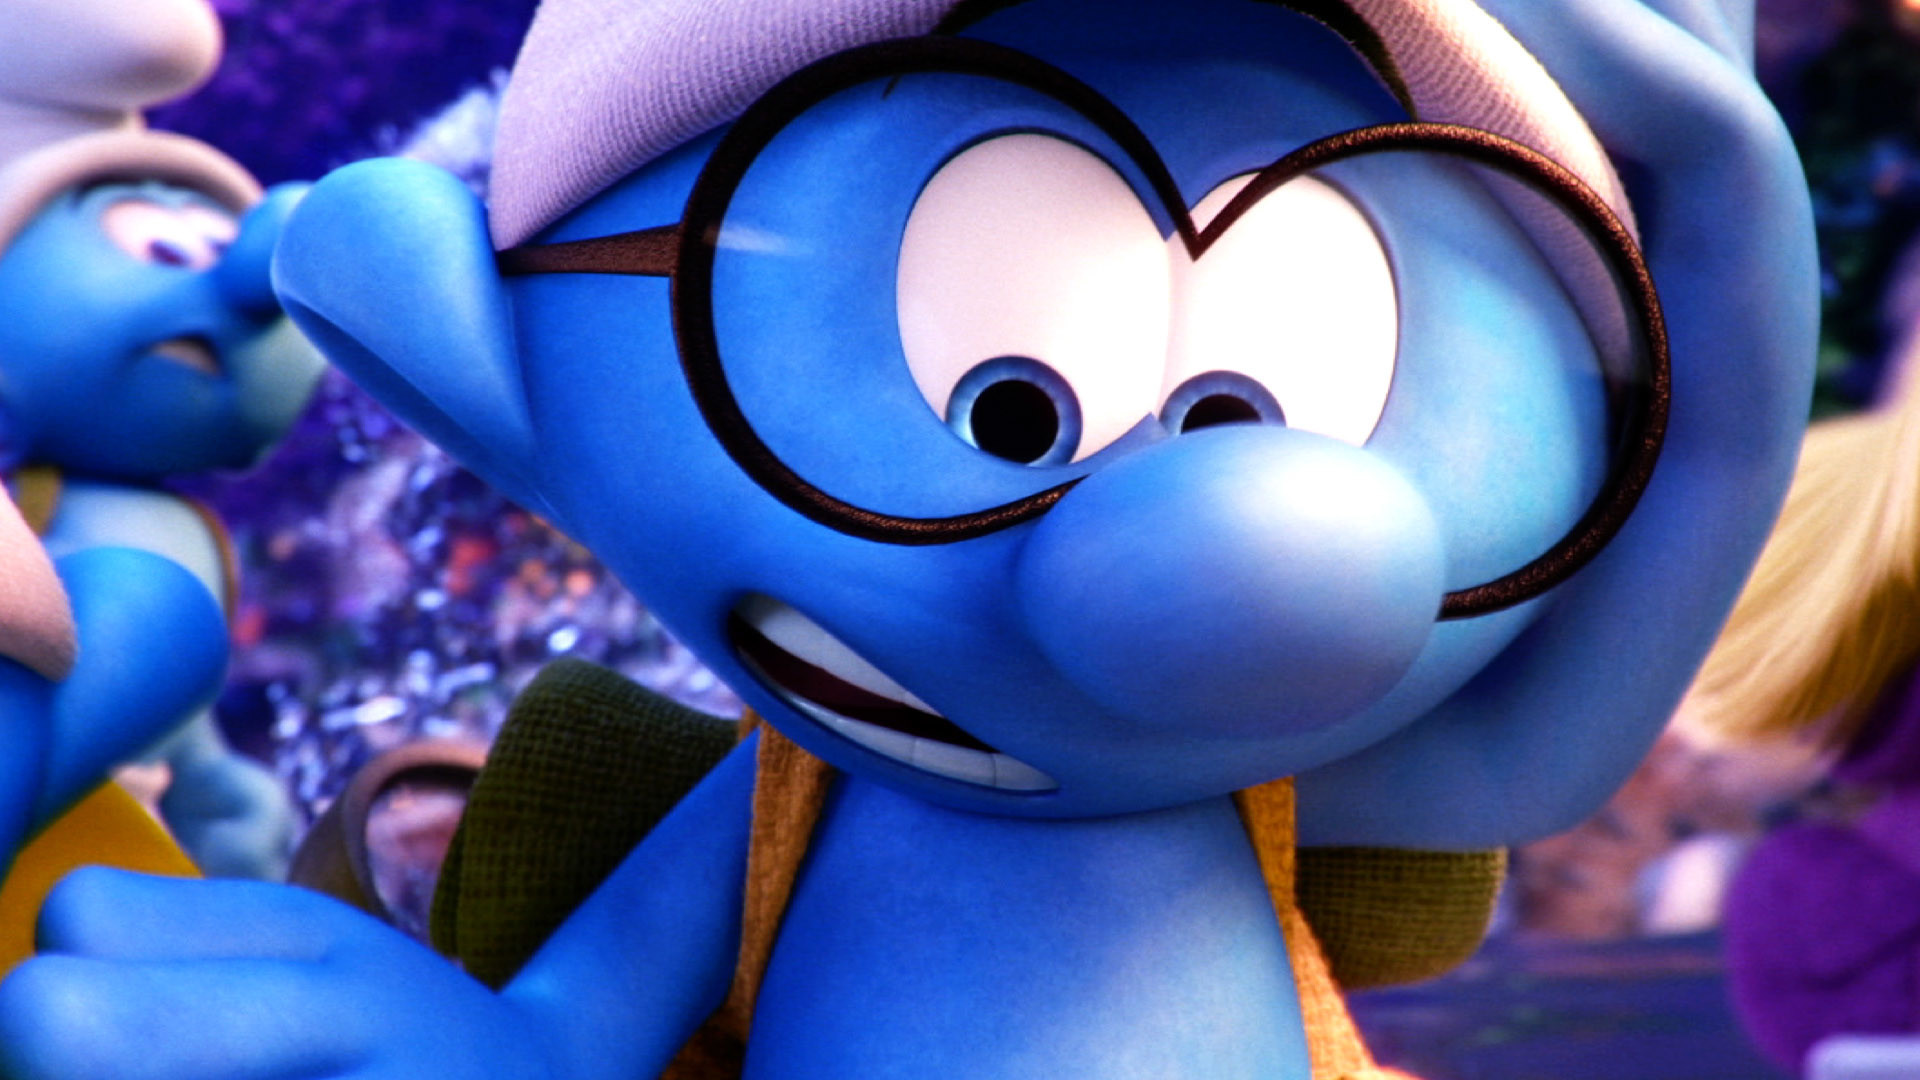 Smurf Wallpaper For Android - Cartoon , HD Wallpaper & Backgrounds